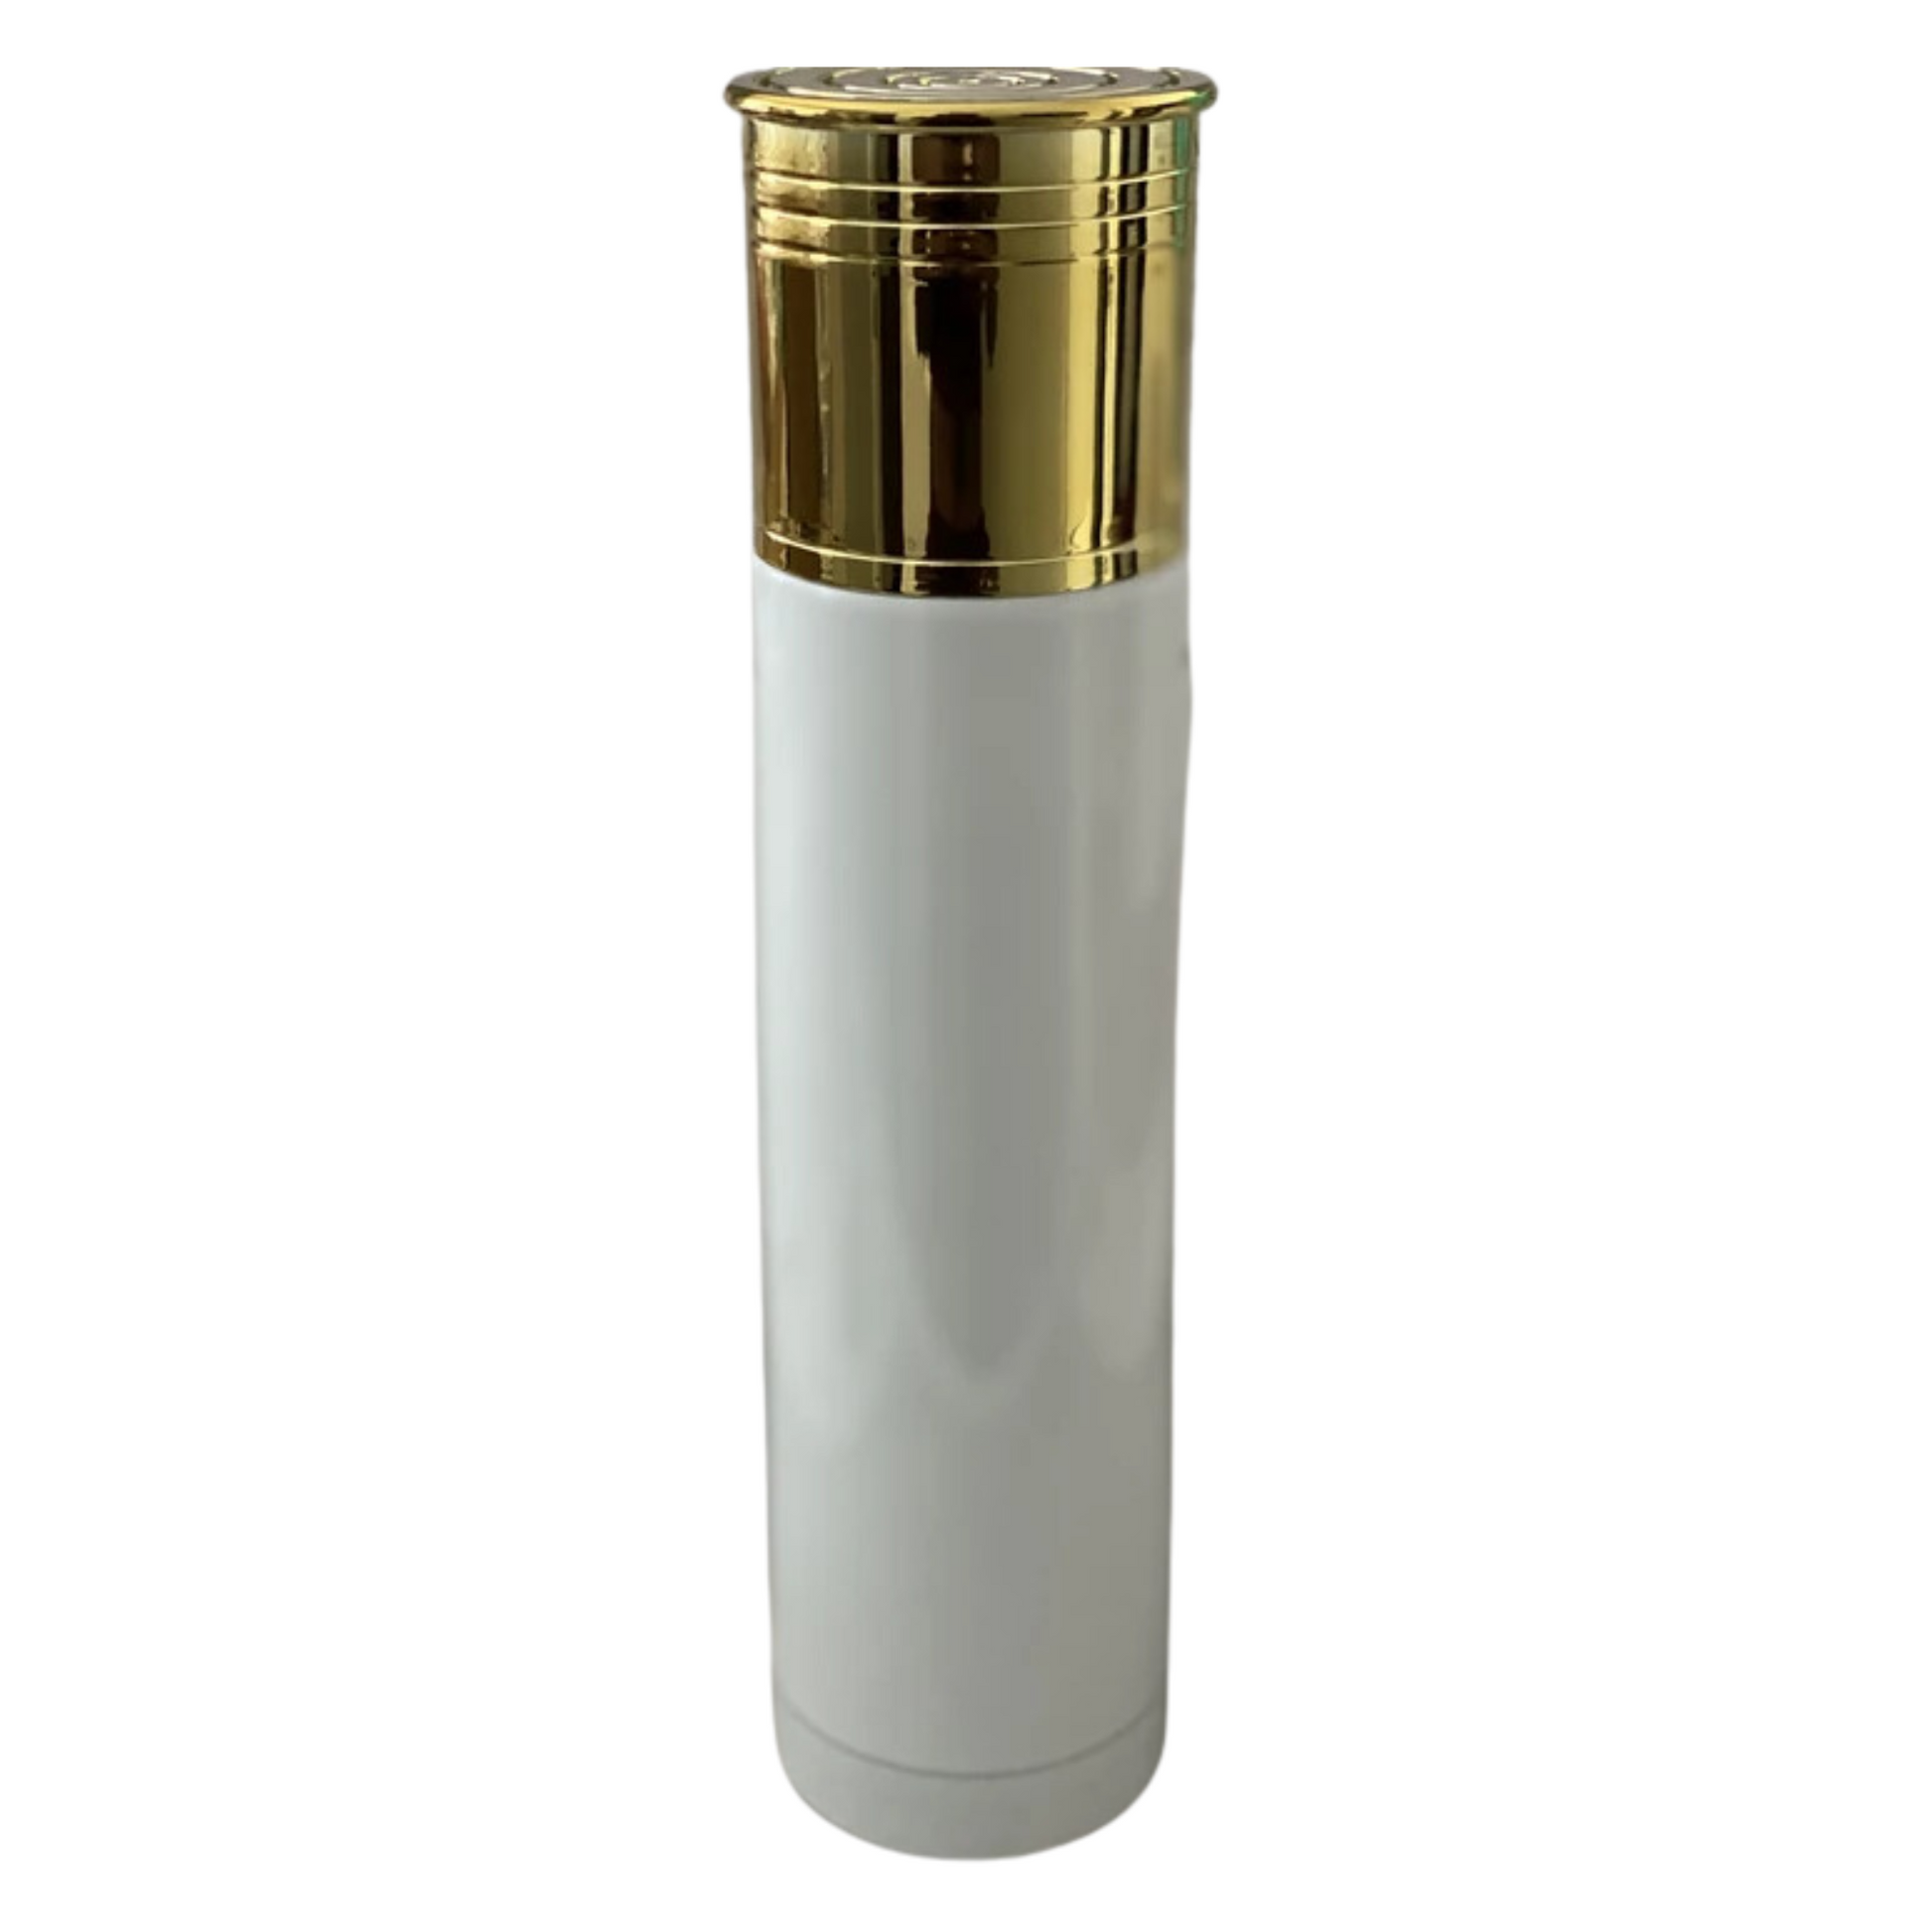 17oz Subliamtion Bullet Stainless Stele Water Bottle